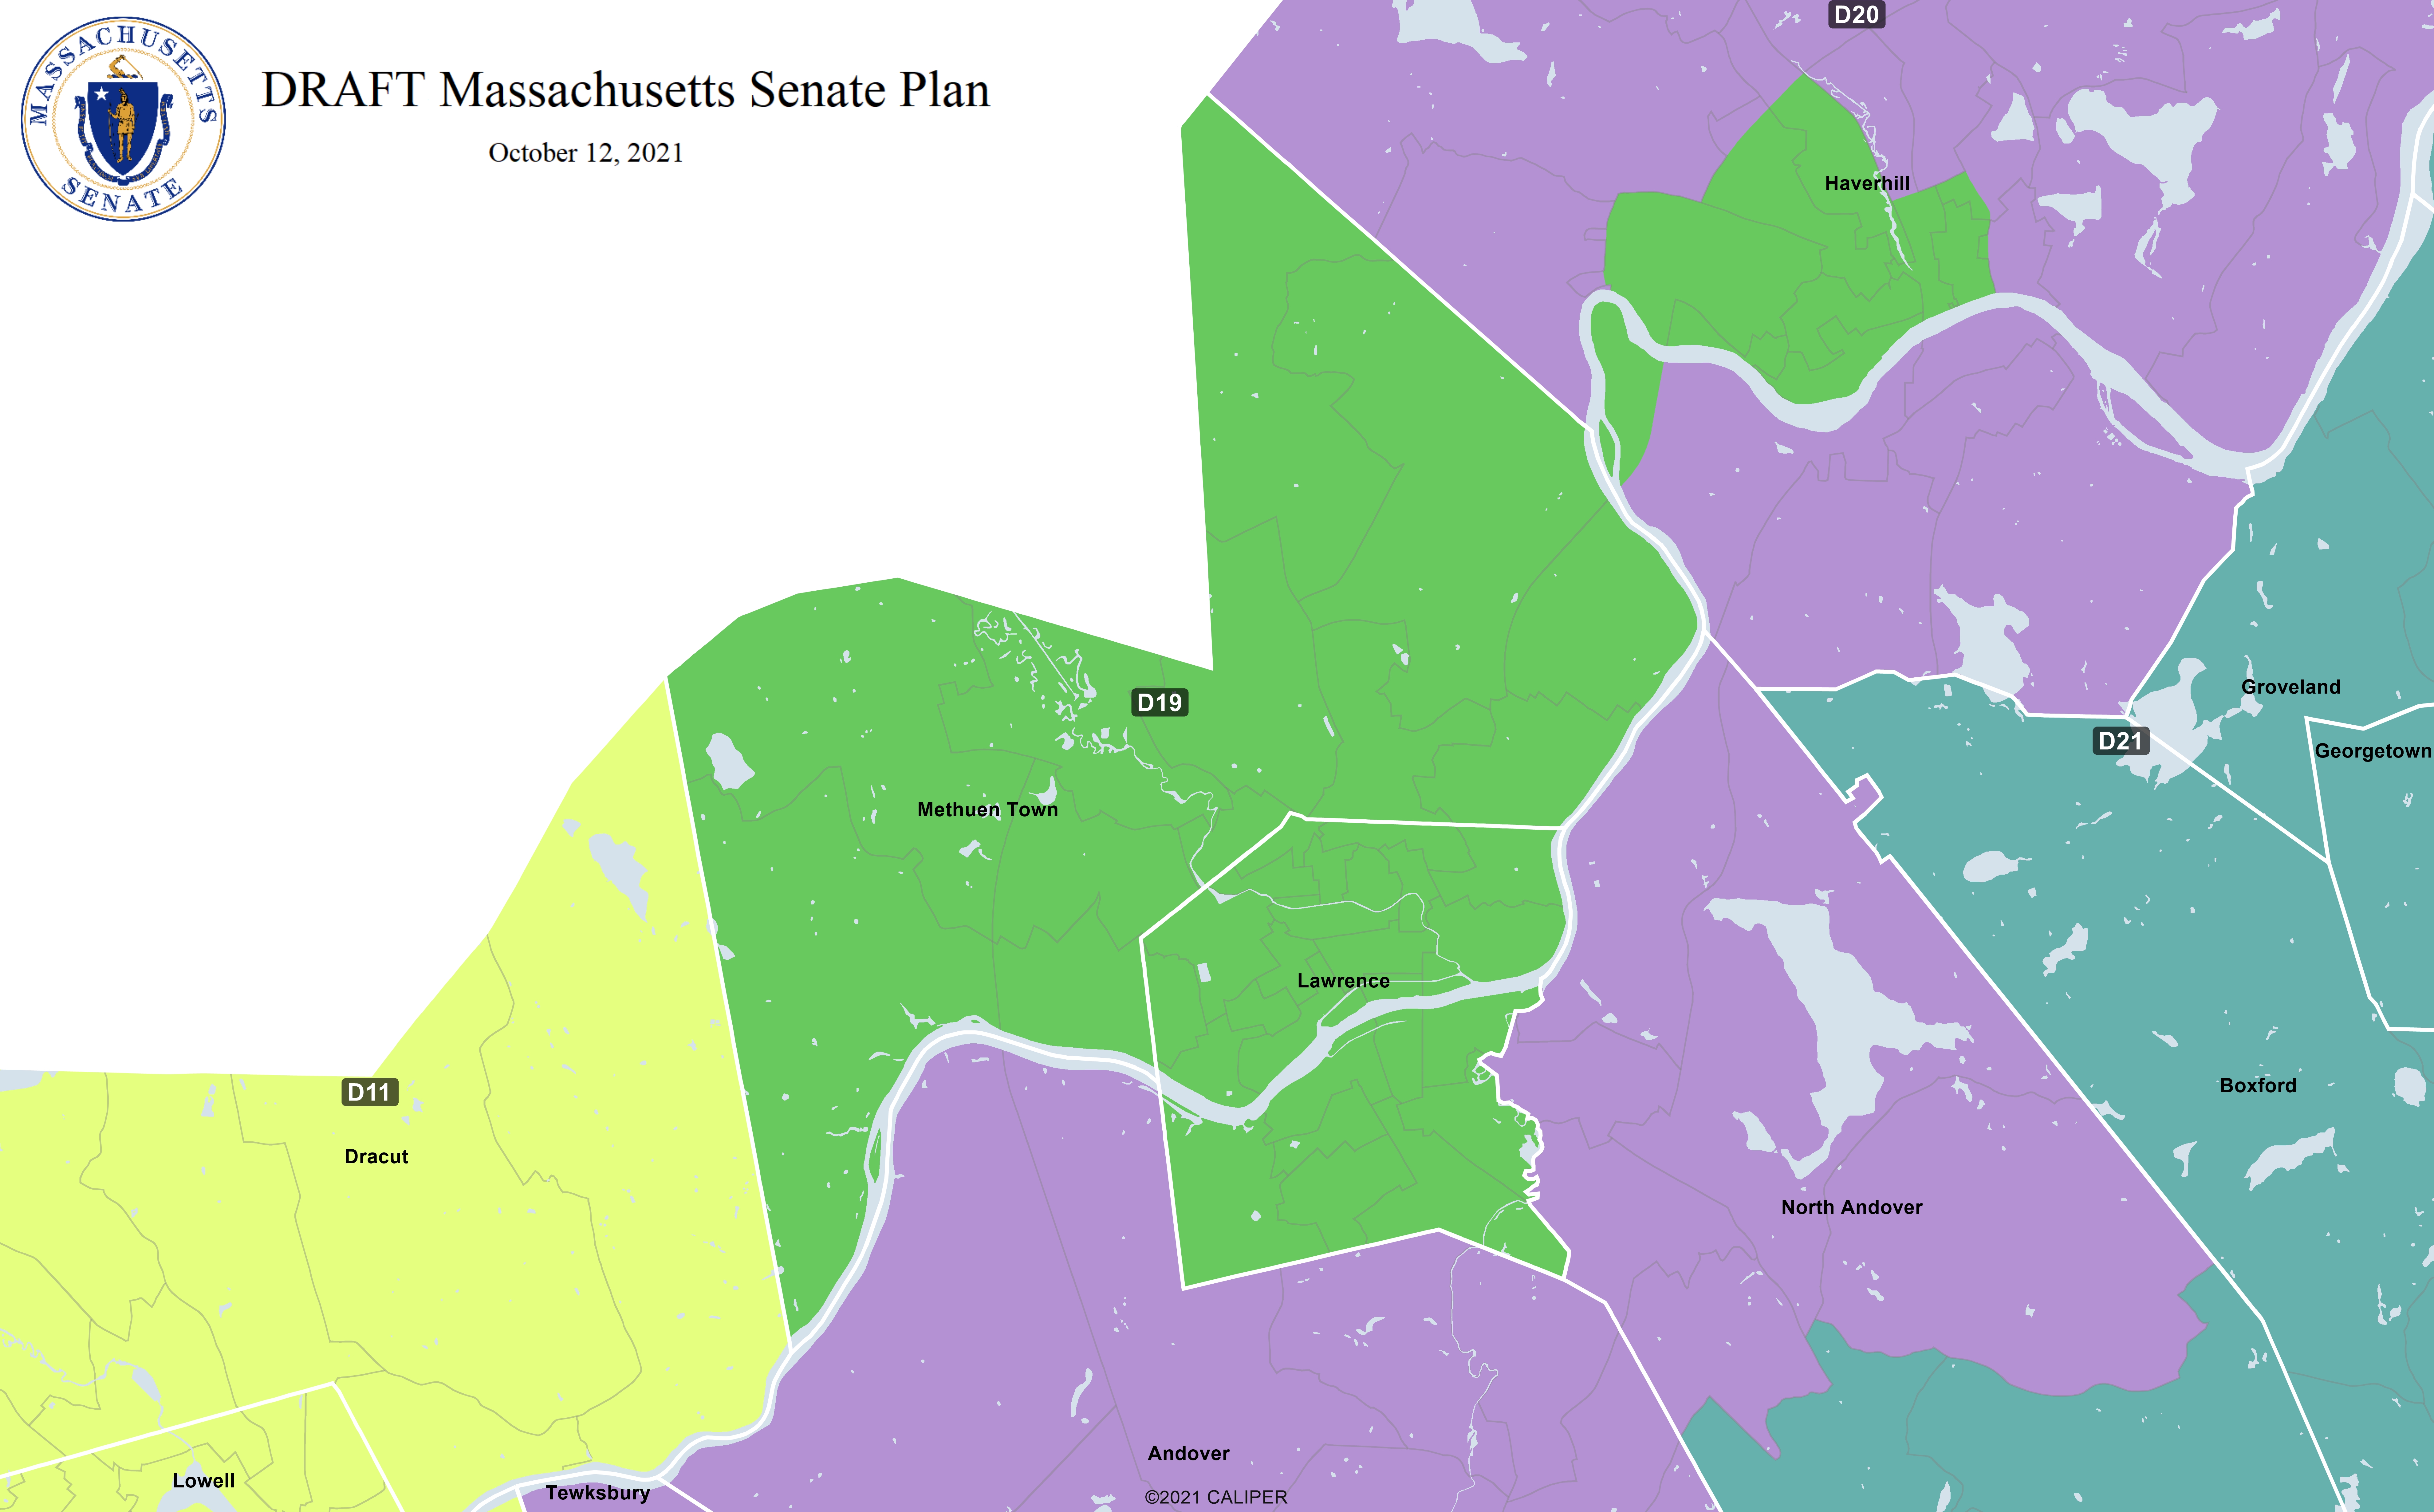 Proposed Massachusetts Senate redistricting map, showing the Lawrence area.